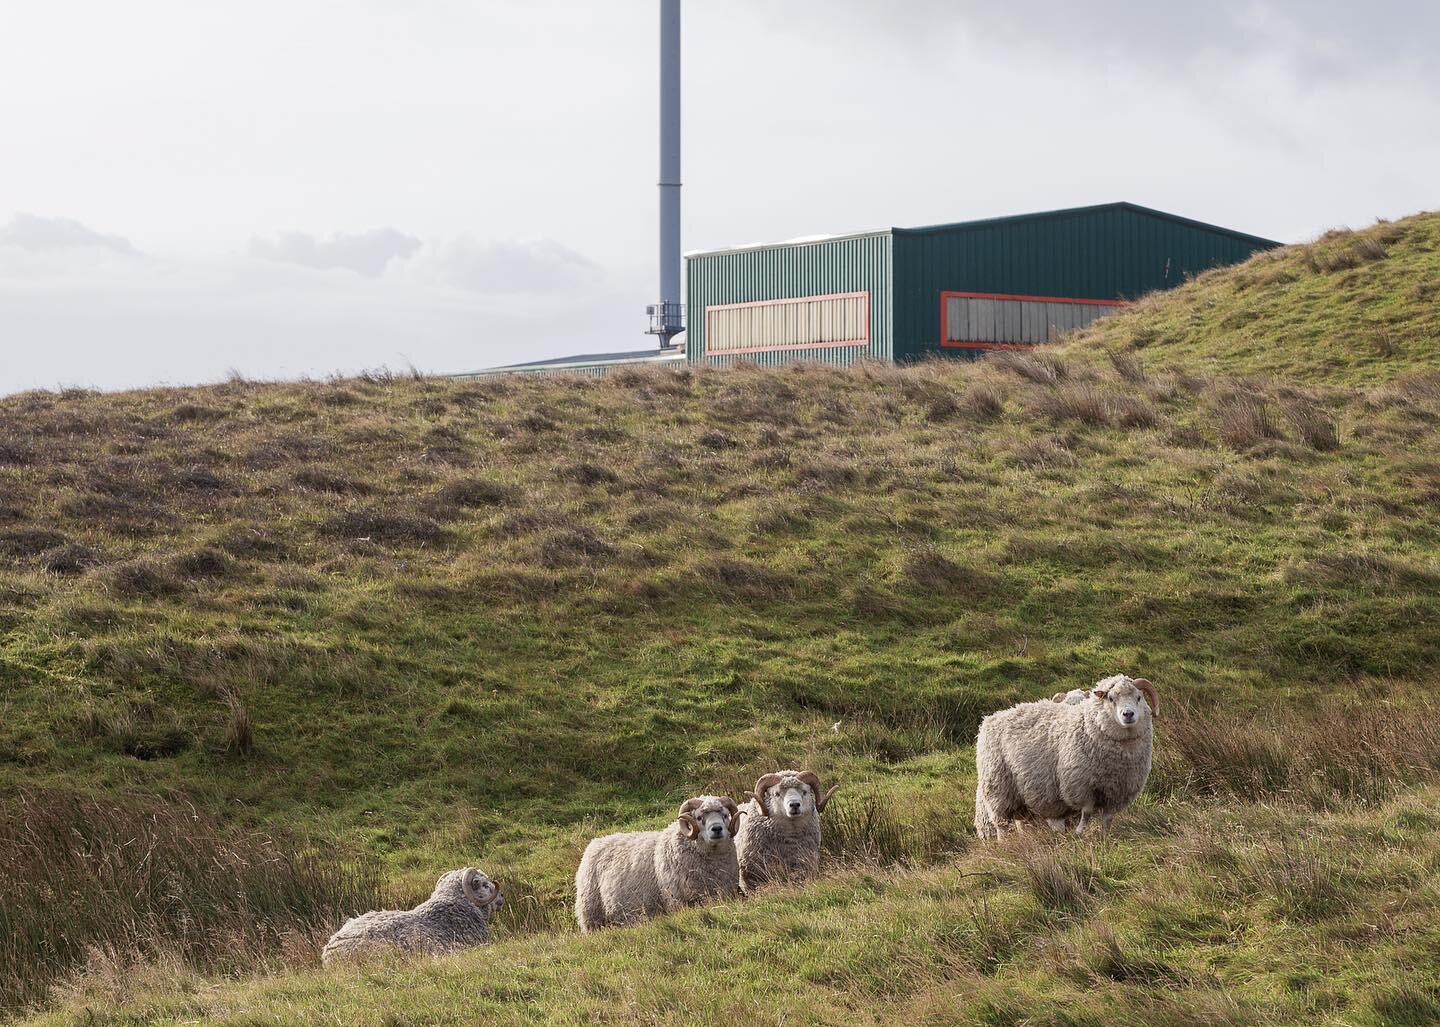 Sheep posing outside Energy Recovery Plant, in Lerwick, Shetland, Scotland (2021).

Plant, built in 1999, burns approximately 22k tonnes (4.5M bin bags) of non-recyclable waste per year from Shetland and Orkney to heat water for 1000 properties in Le